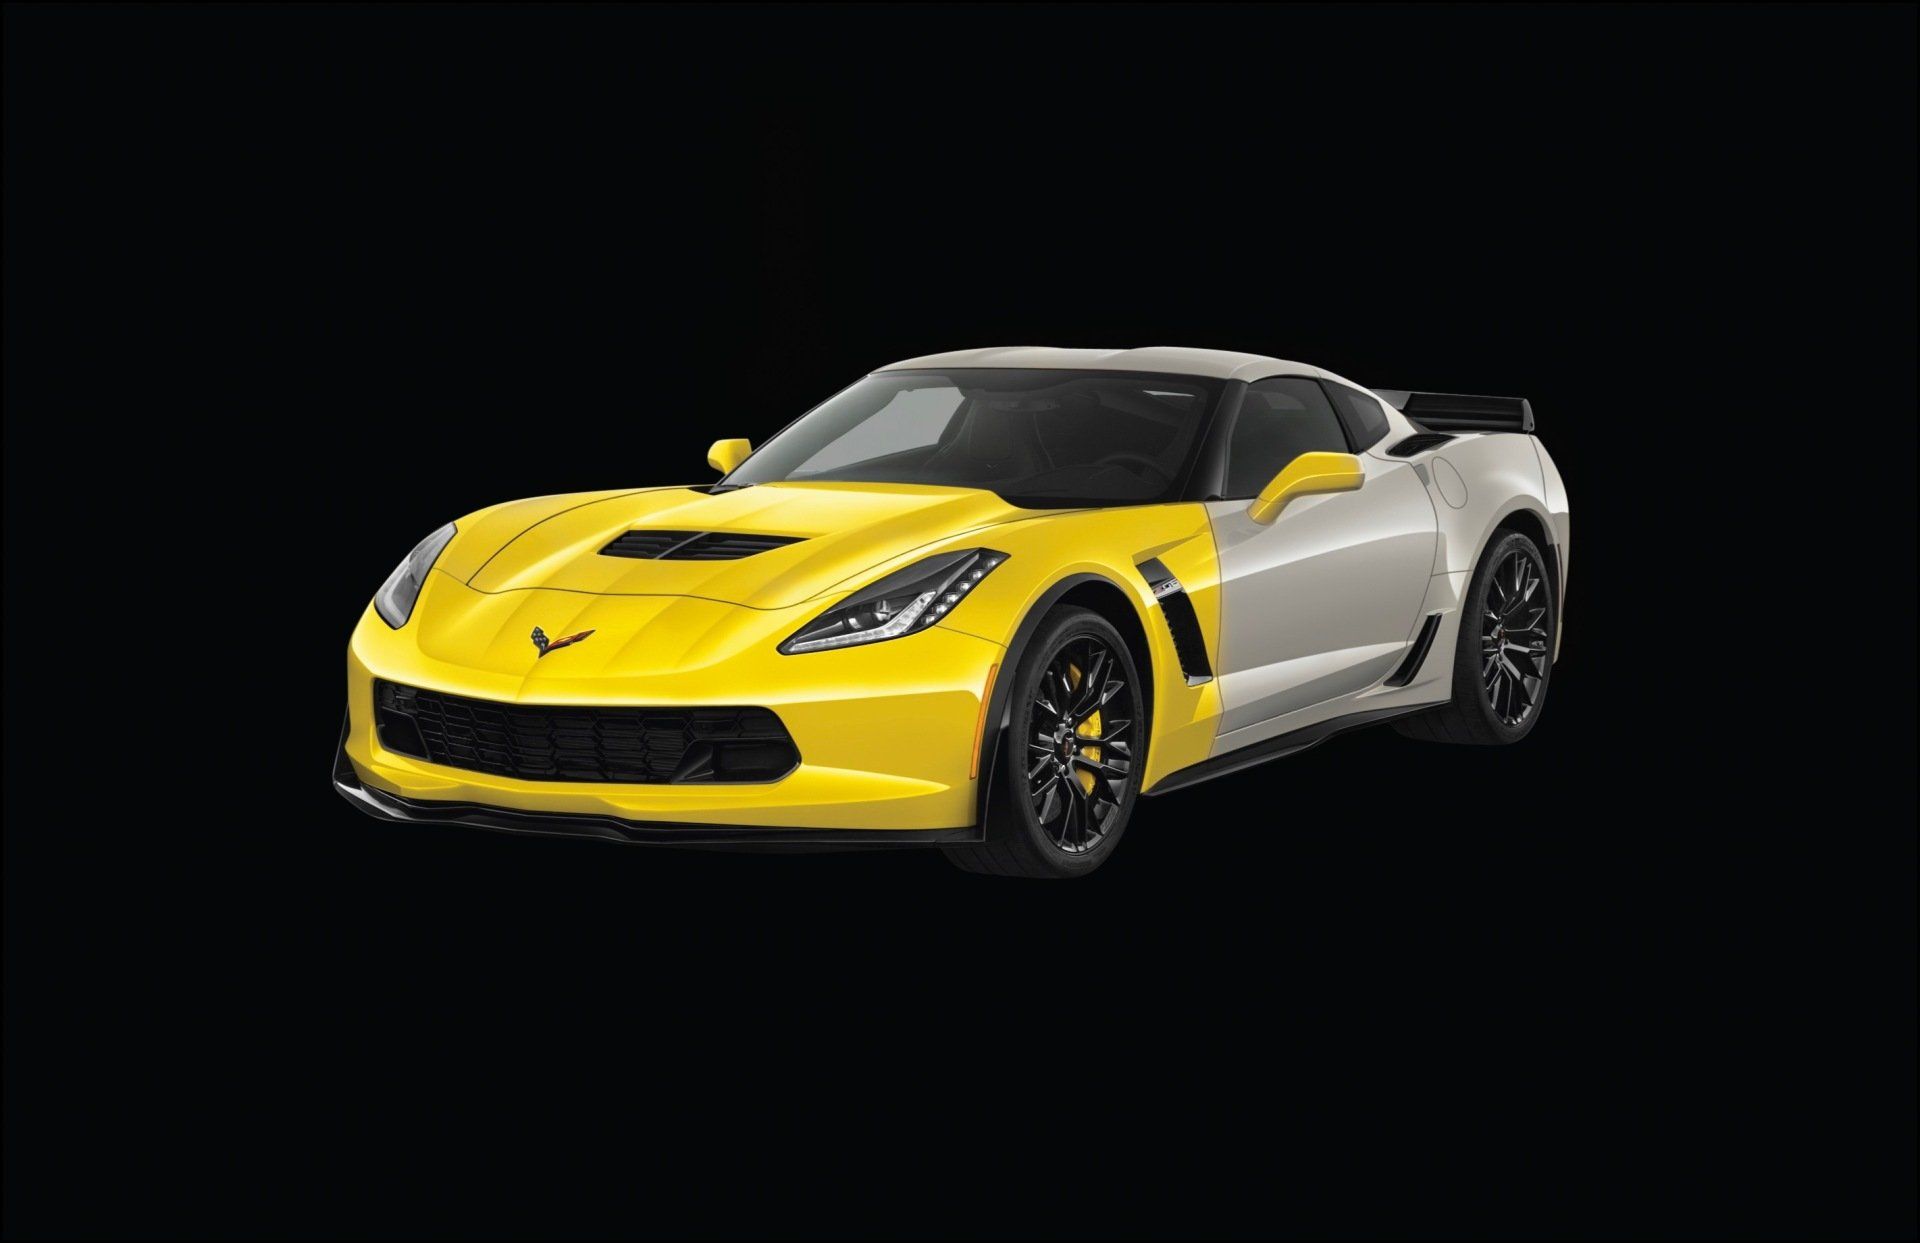 A yellow and white sports car on a black background.